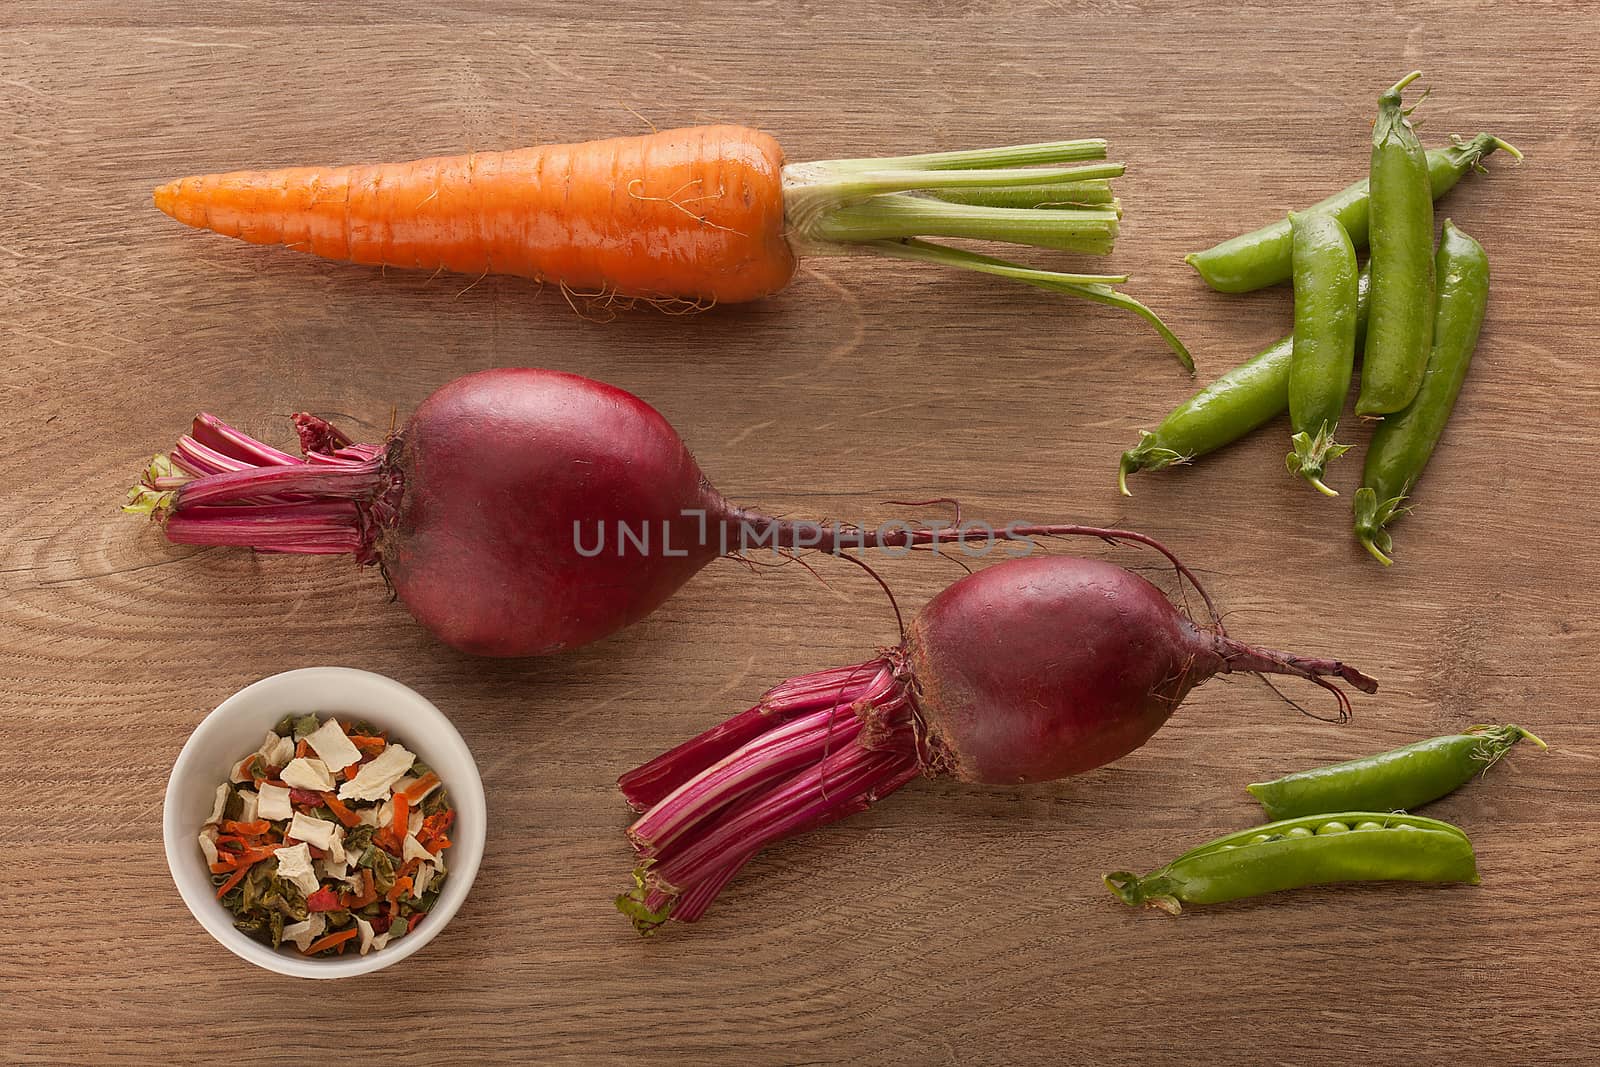 Top view of carrot, two beets, some pea pods and bowl with dried herbs on the wooden table